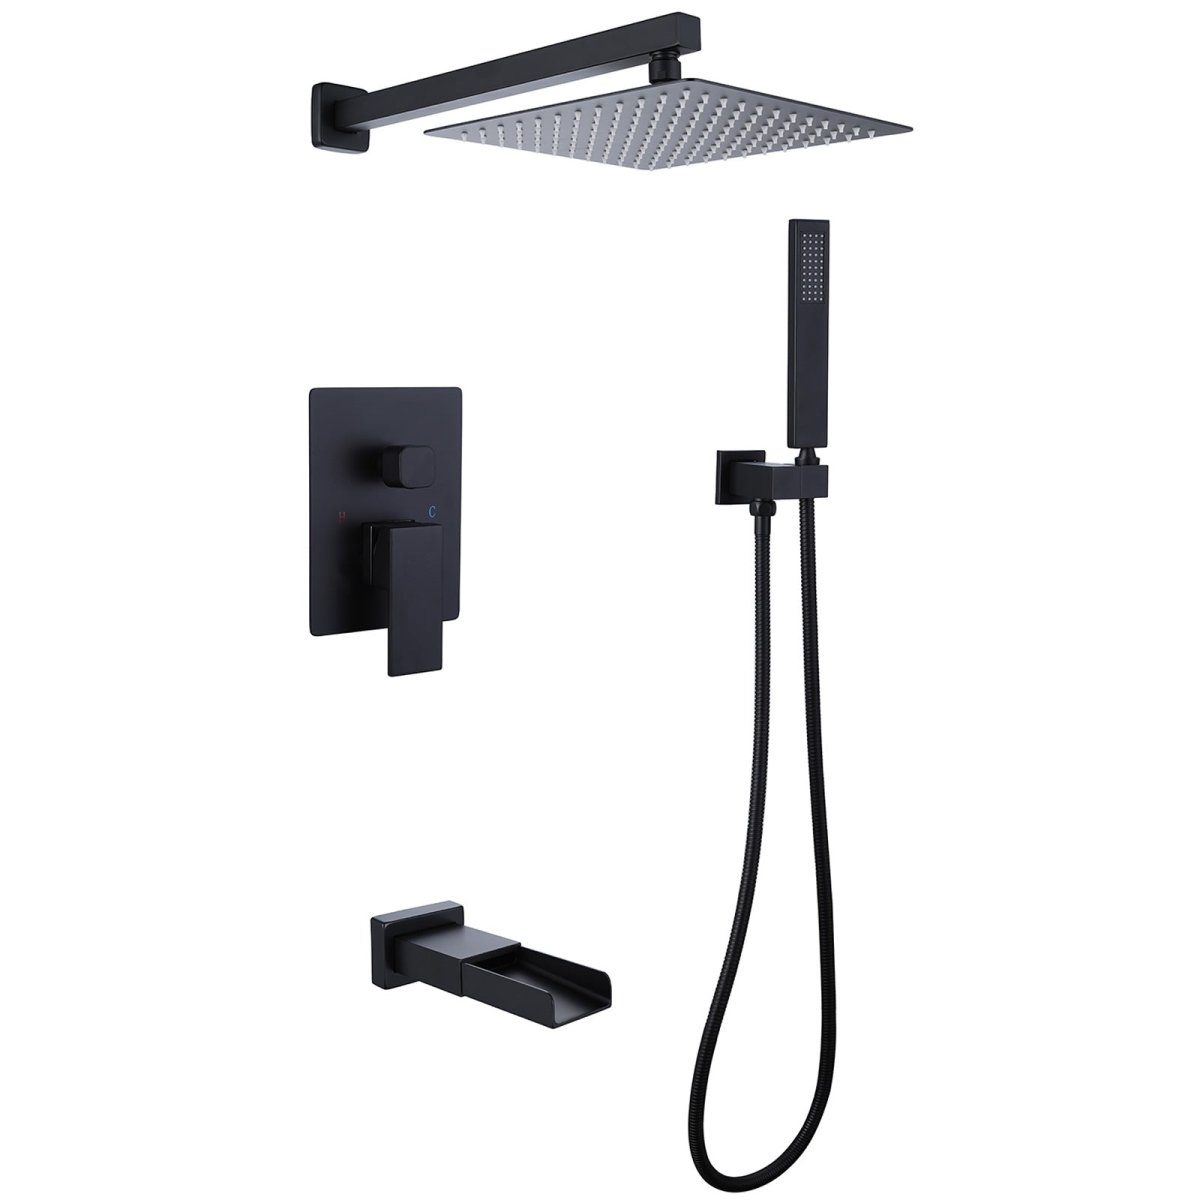 Waterfall Spout 3-Spray Tub and Shower Faucet Matte Black - buyfaucet.com